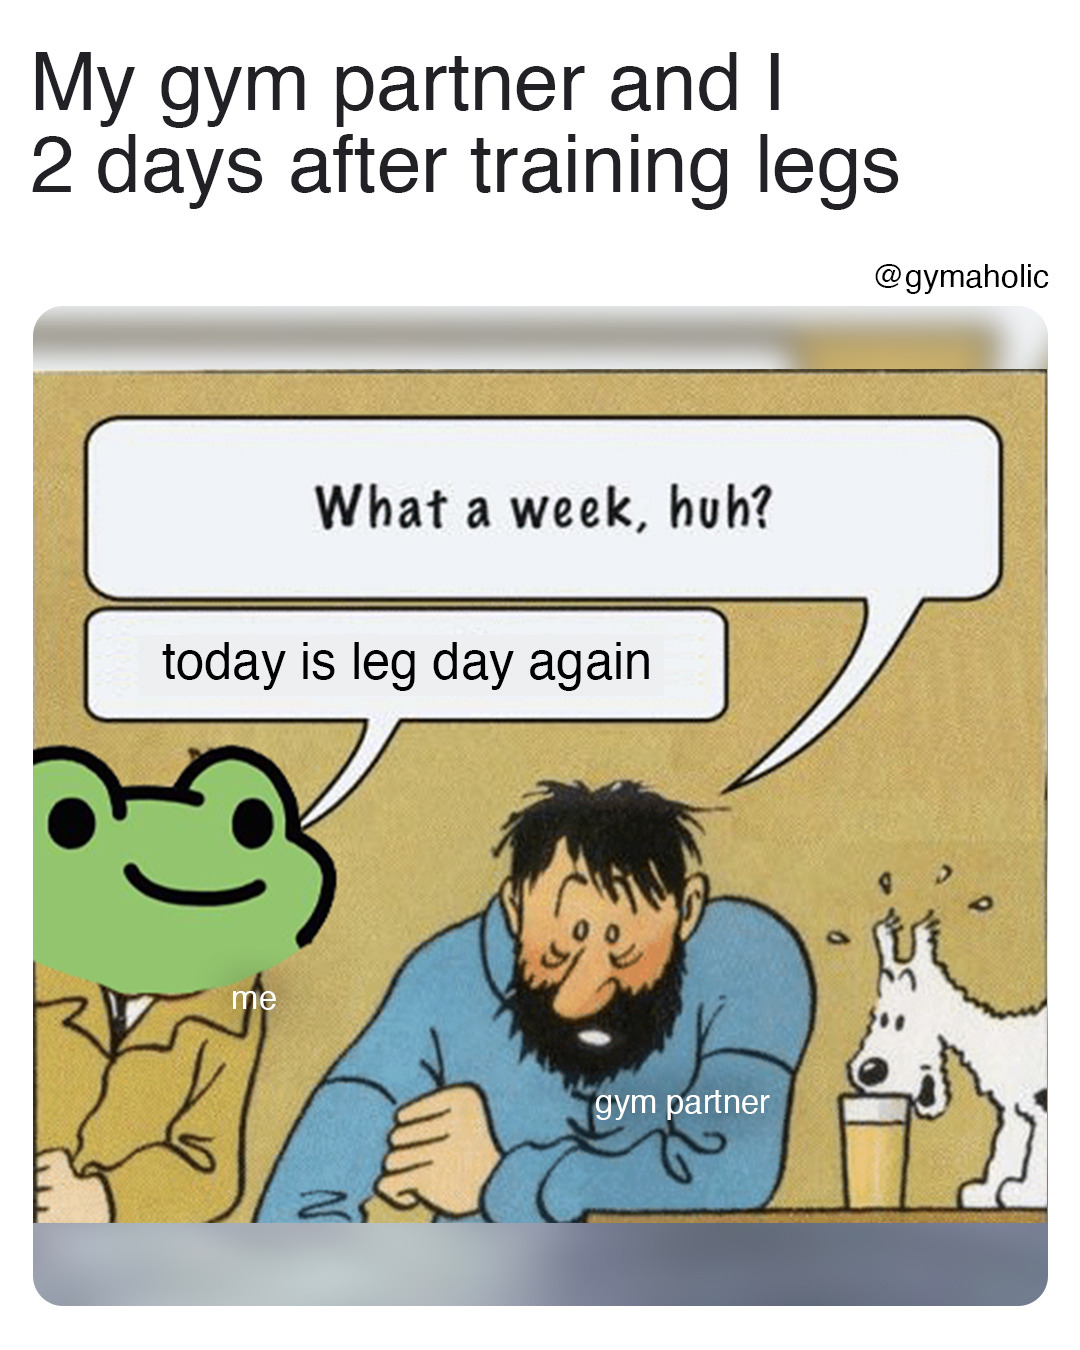 My gym partner and I 2 days after training legs